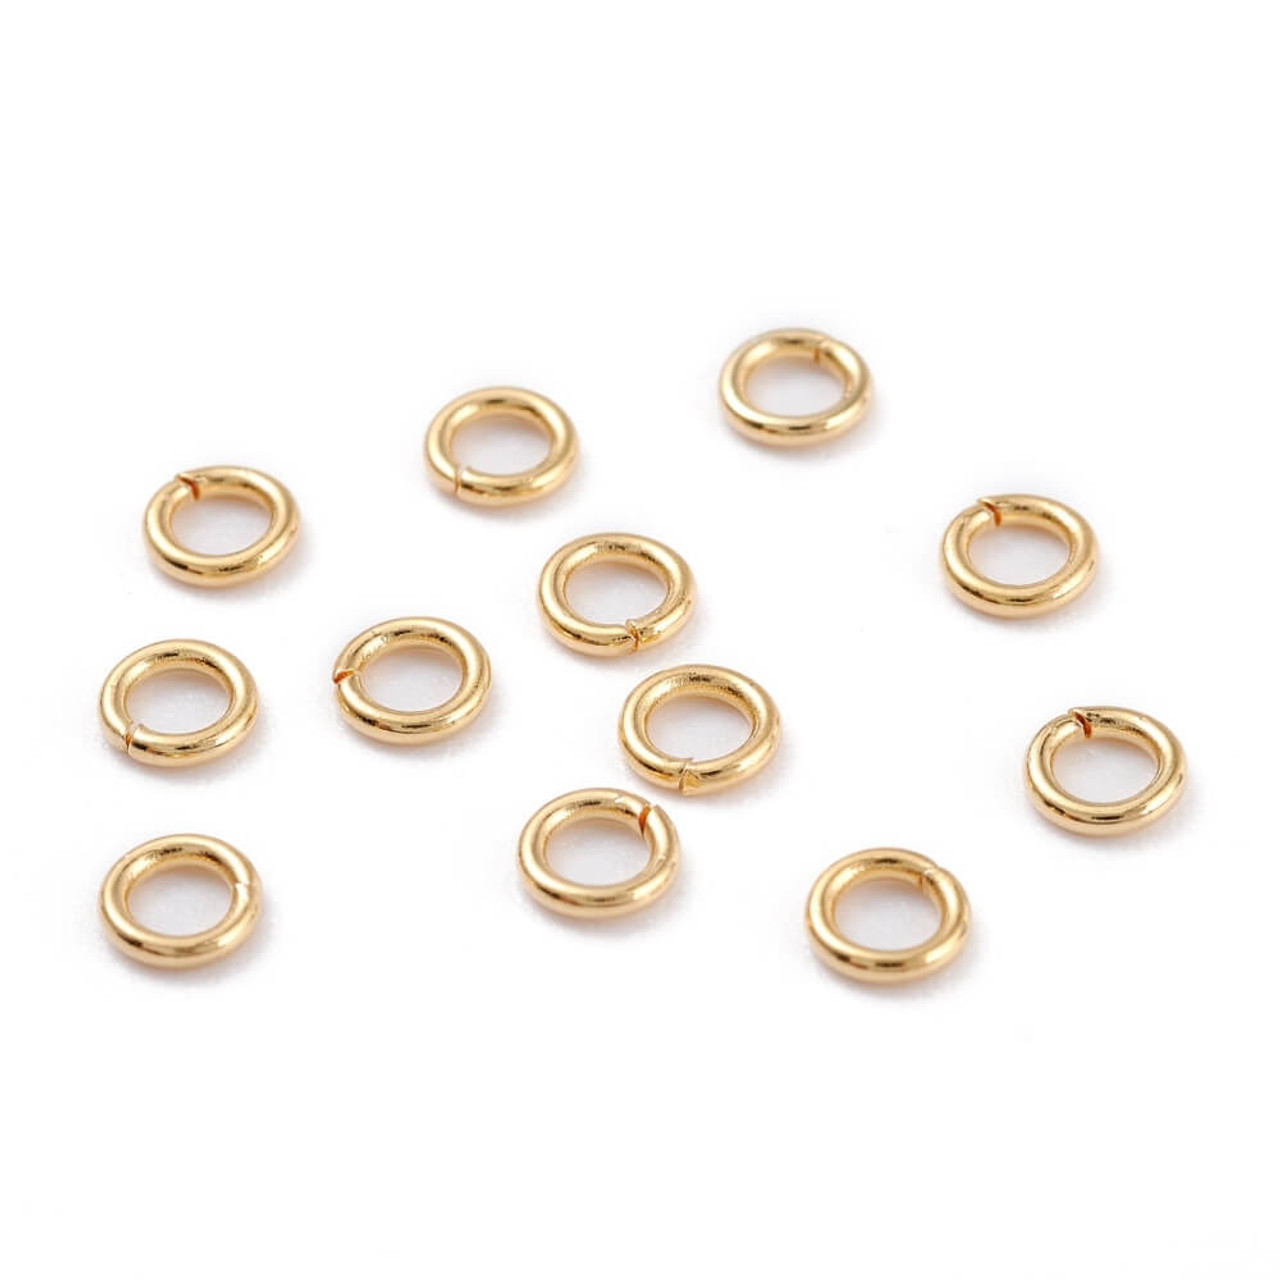 Gold Plated Open Jump Rings, 4mm Gold Jump Rings, 100pc 